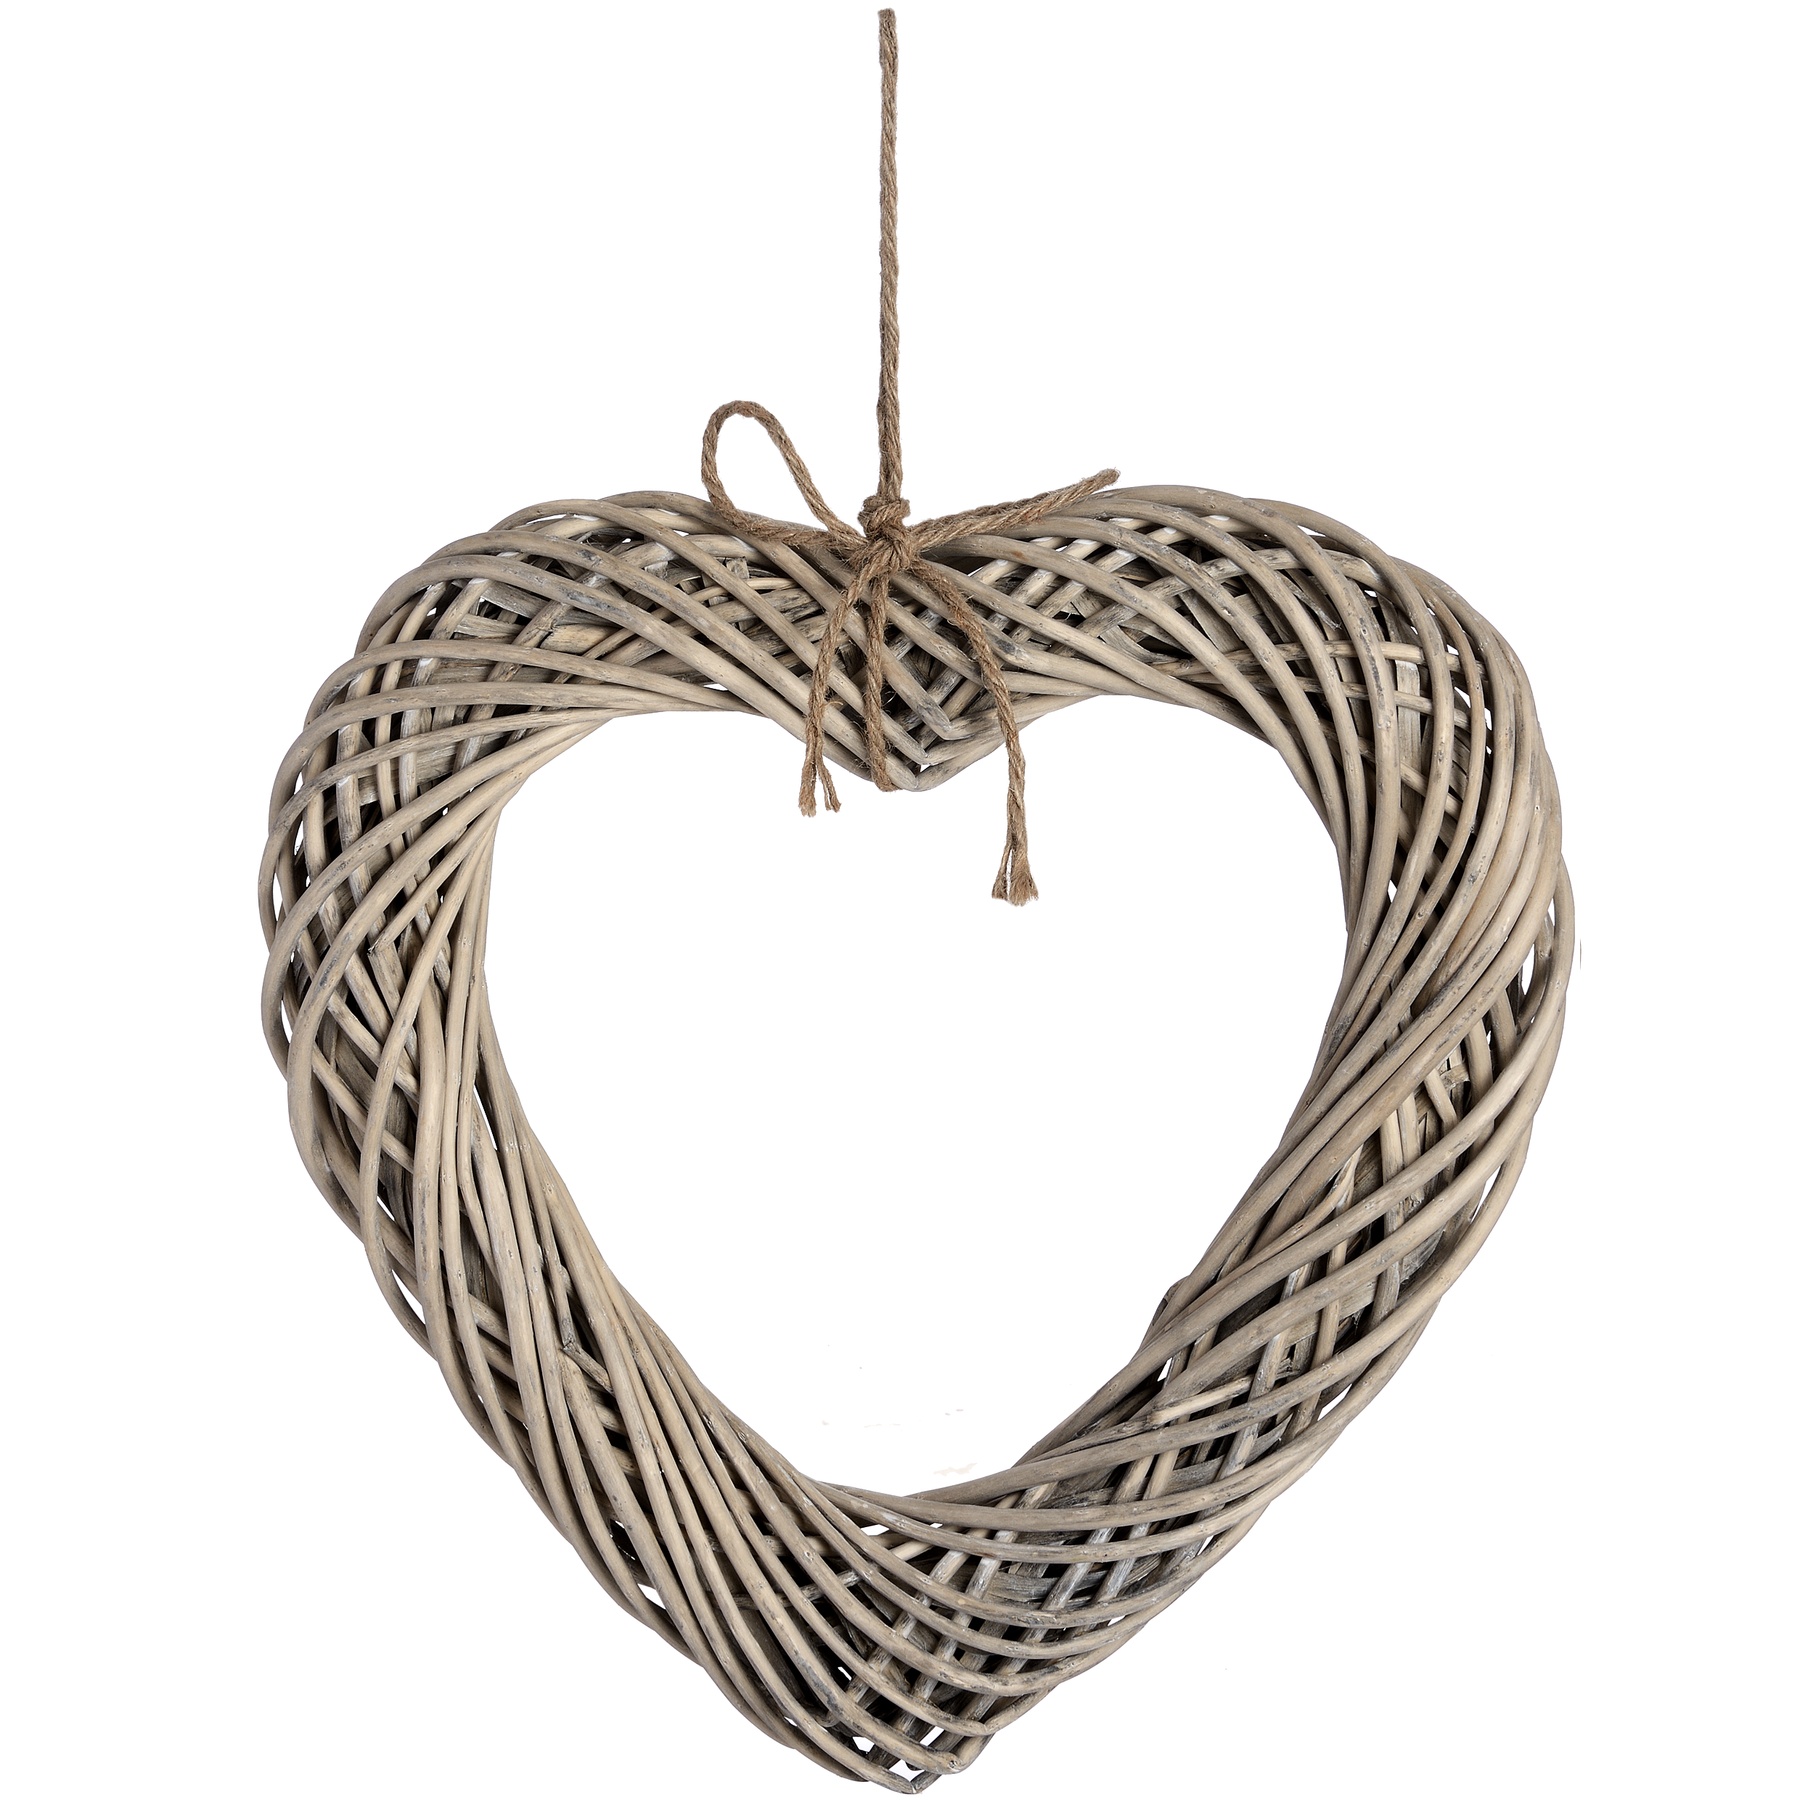 Large Wicker Hanging Heart with Rope Detail